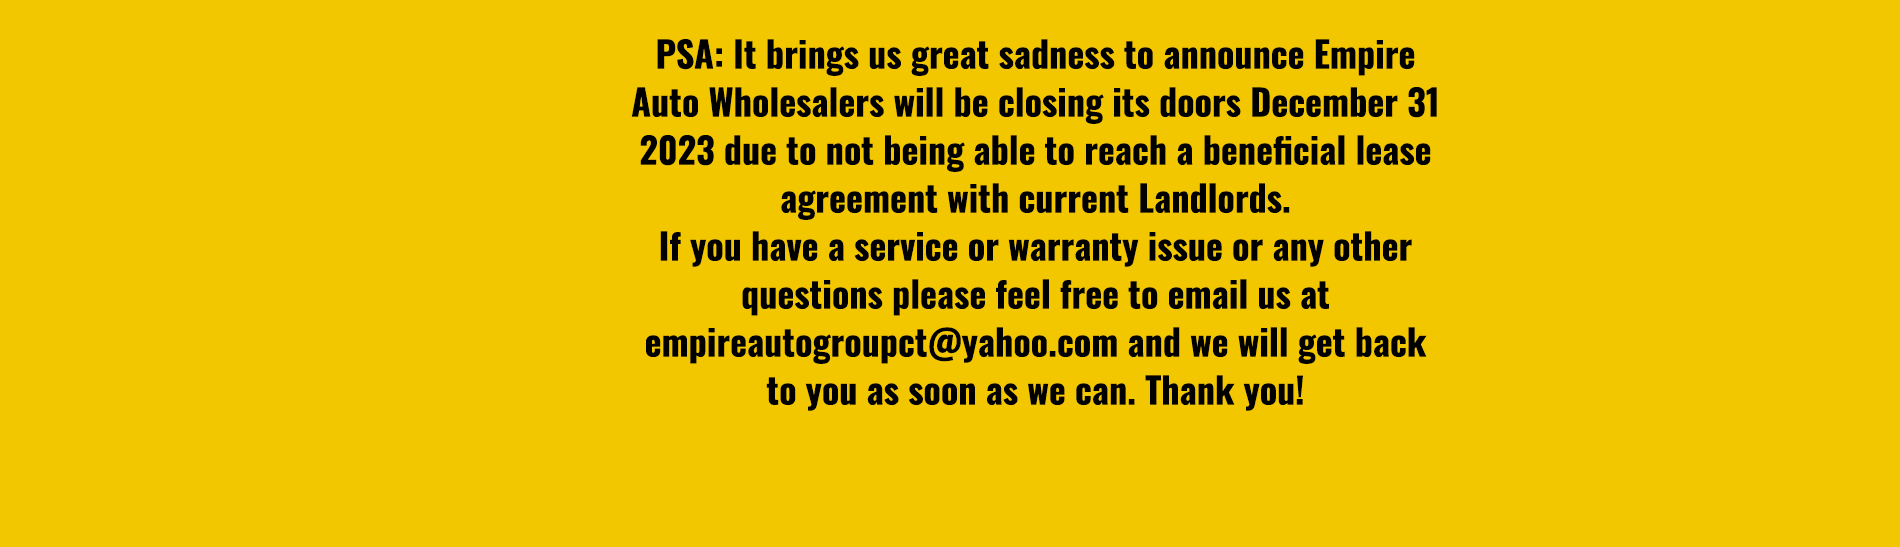 PSA: It brings us great sadness to announce Empire Auto Wholesalers will be closing its doors December 31 2023 due to not being able to reach a beneficial lease agreement with current Landlords. If you have a service or warranty issue or any other questions please feel free to email us at empireautogroupct@yahoo.com and we will get back to you as soon as we can. Thank you!